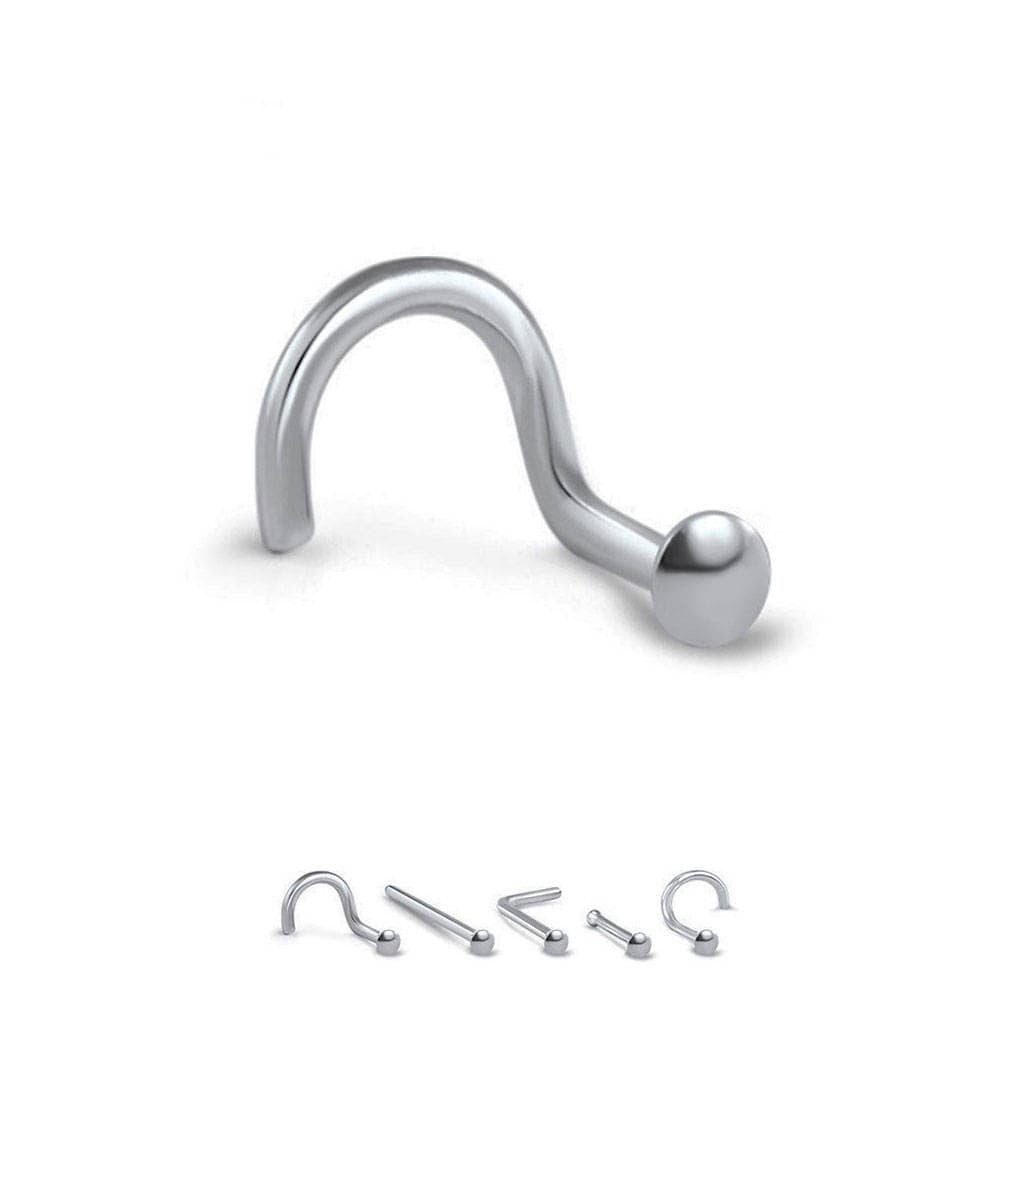 STONE Studs Stainless L Shape Bend NOSE Bones RINGS Screws BODY Piercing Jewelry 